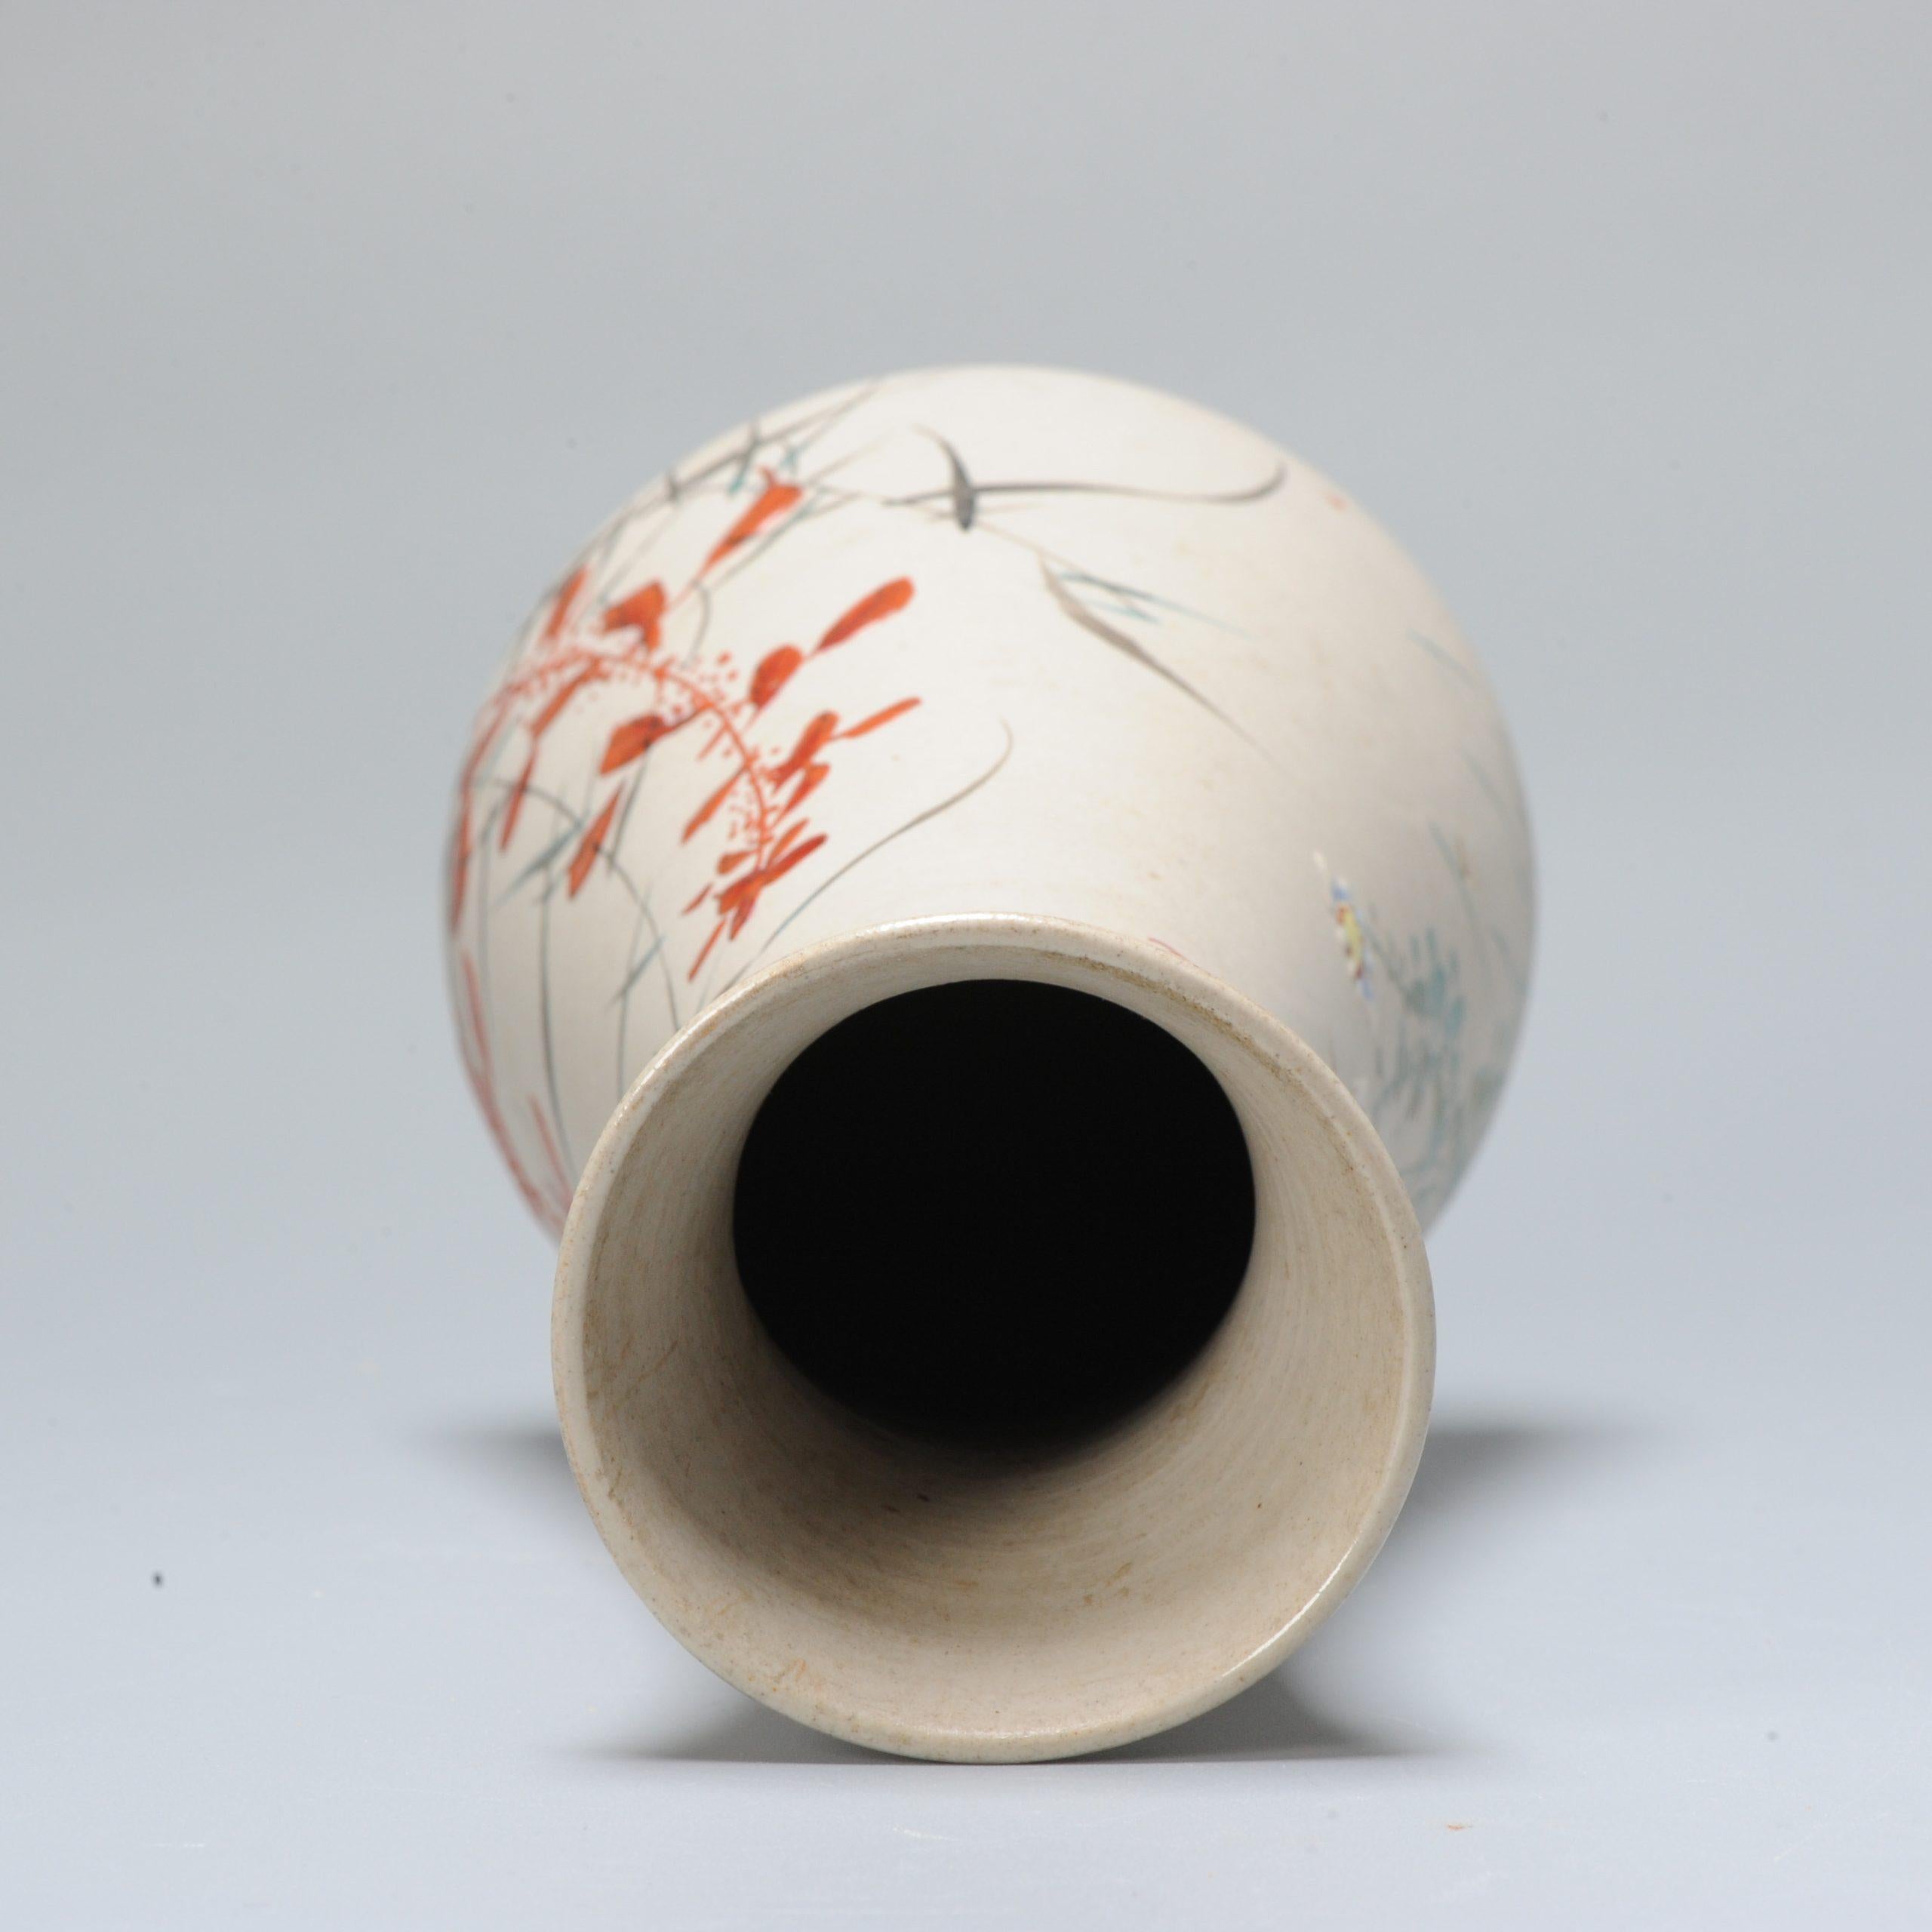 Antique Japanese Banko Pottery Sake Bottle, Late 19th or Early 20th Century In Good Condition For Sale In Amsterdam, Noord Holland